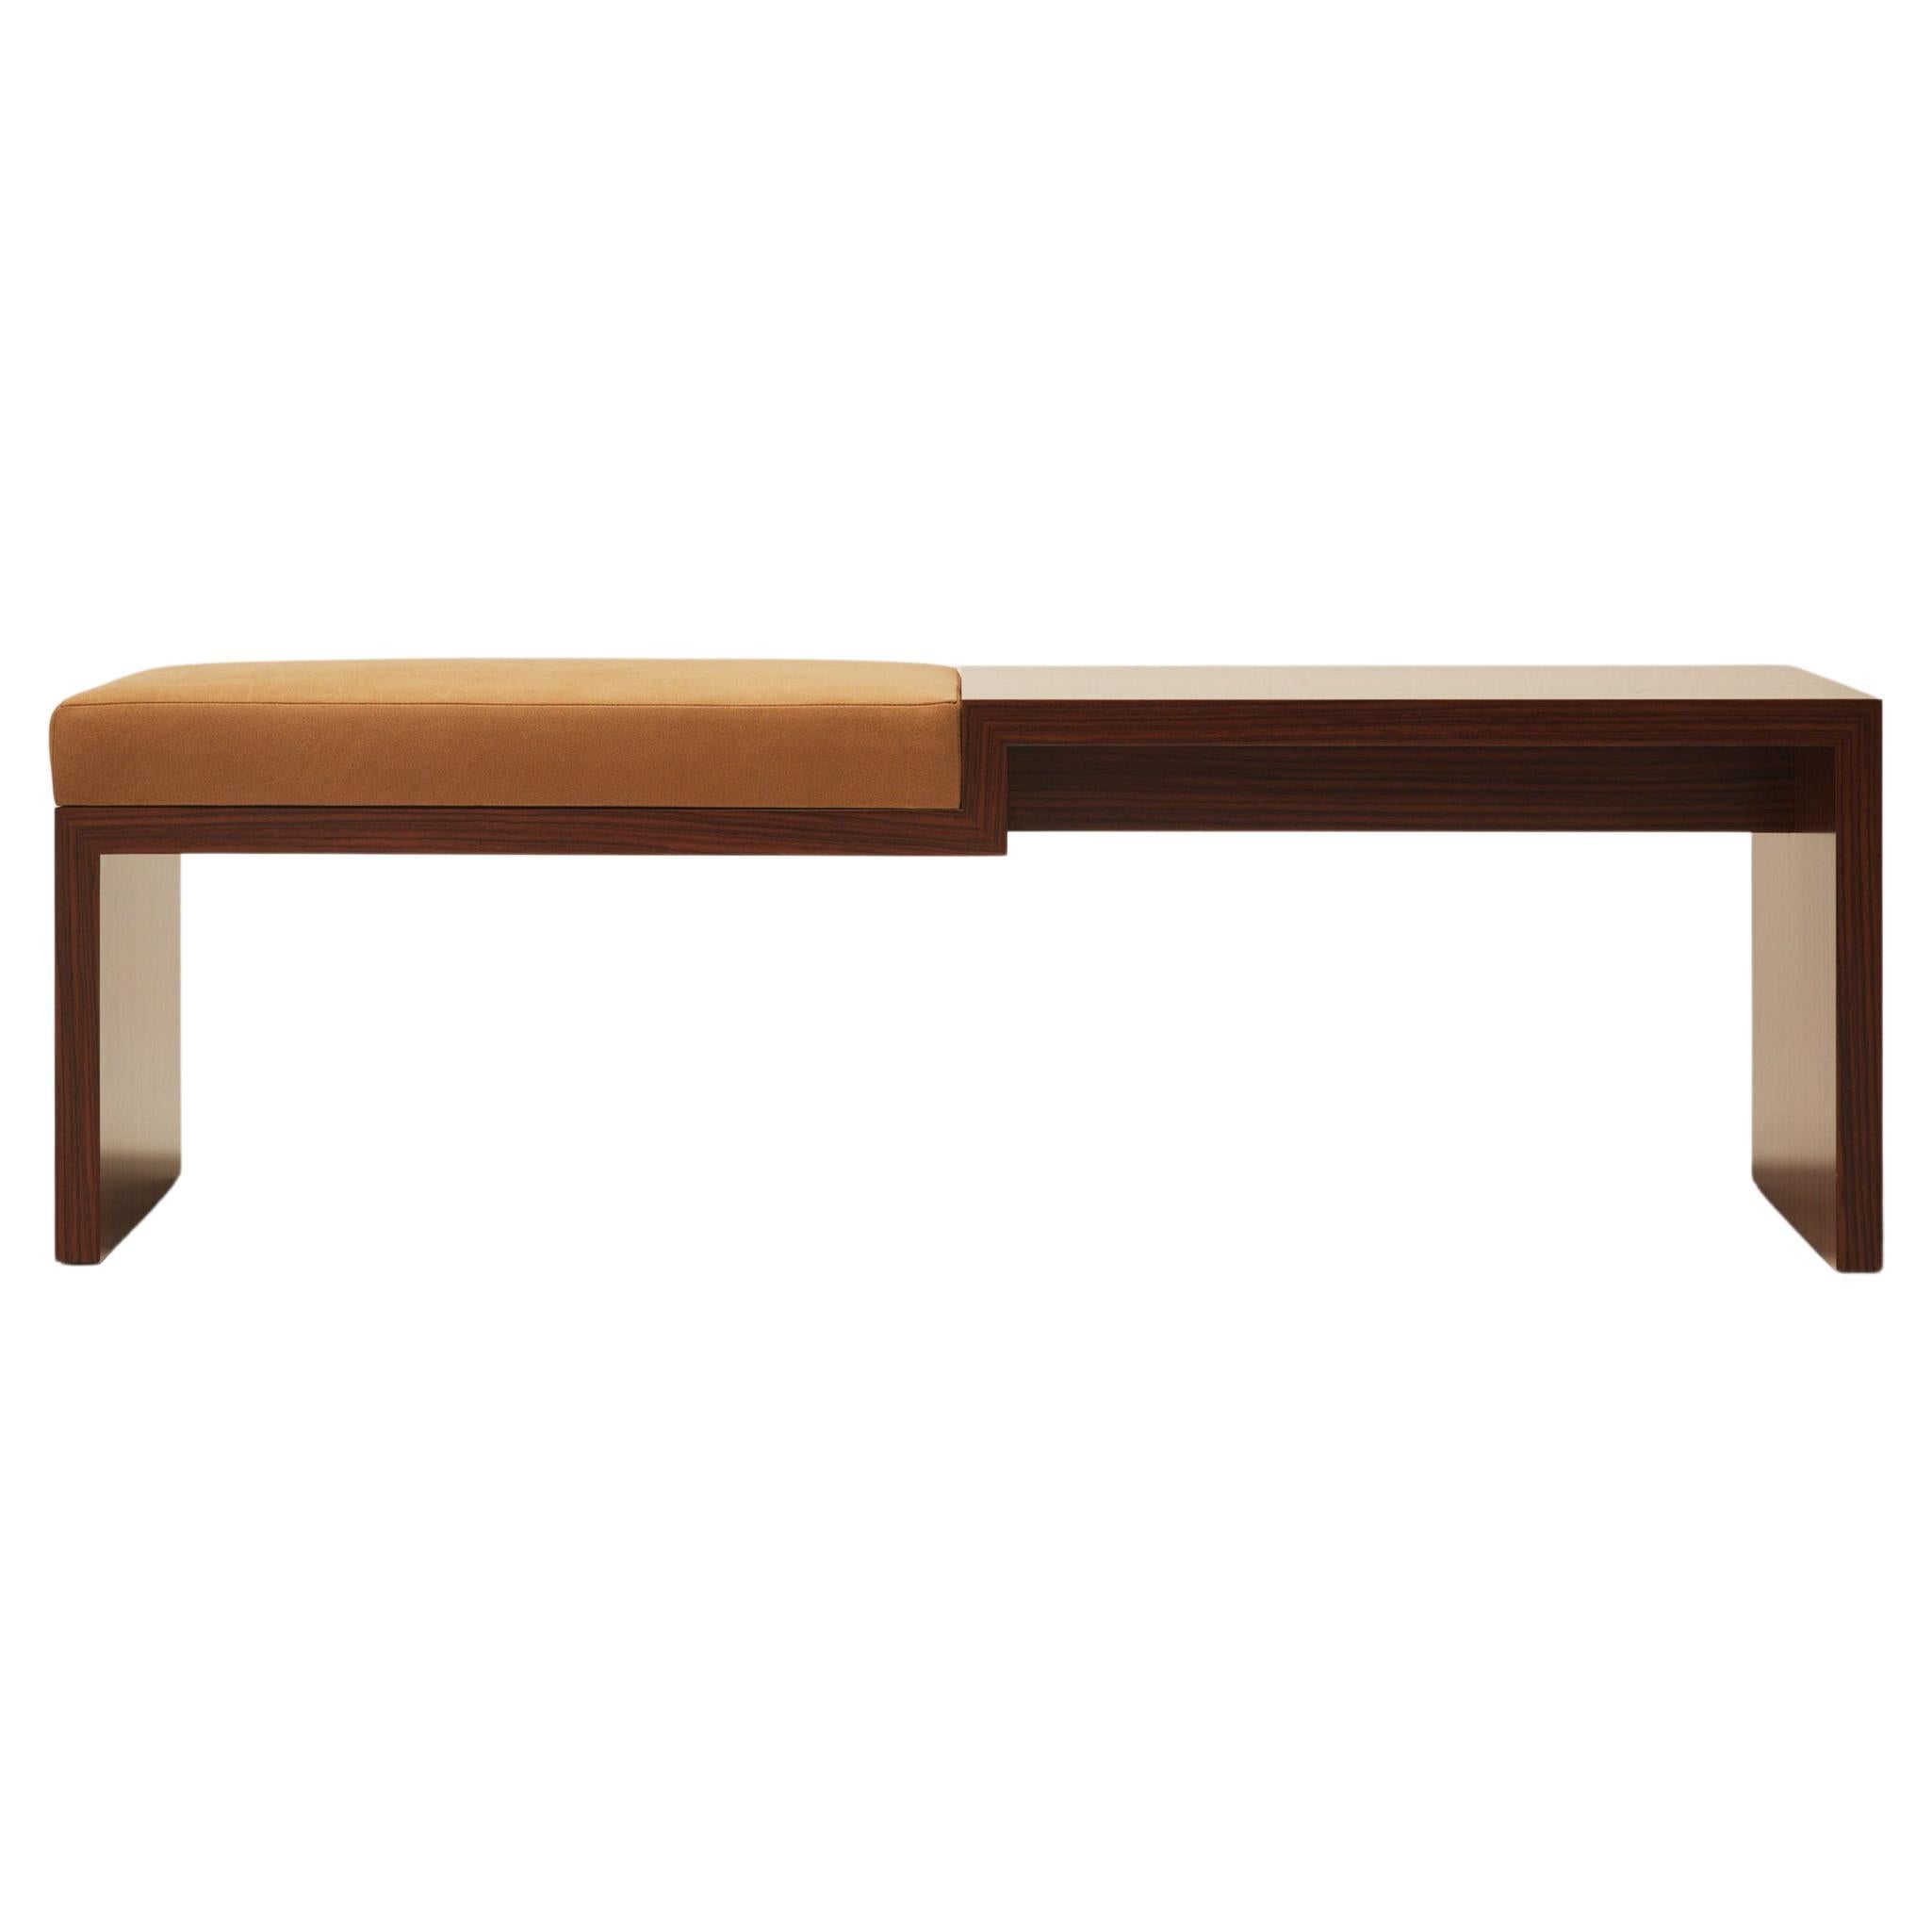 Continuous Bench - Hand applied wood veneer & leather upholstery For Sale